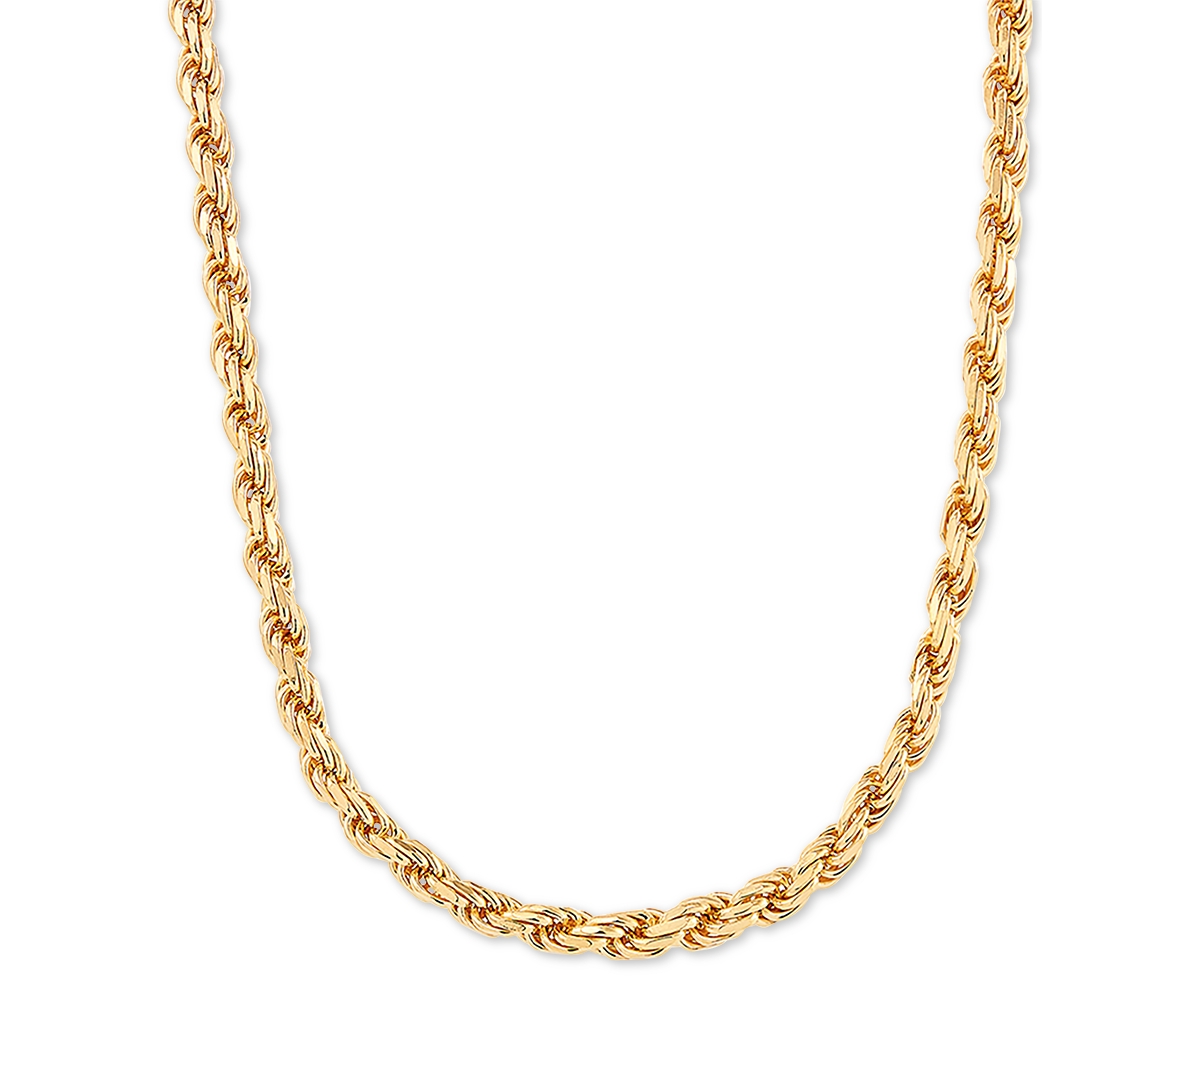 Rope Link 22" Chain Necklace in 18k Gold-Plated Sterling Silver - Gold Over Silver